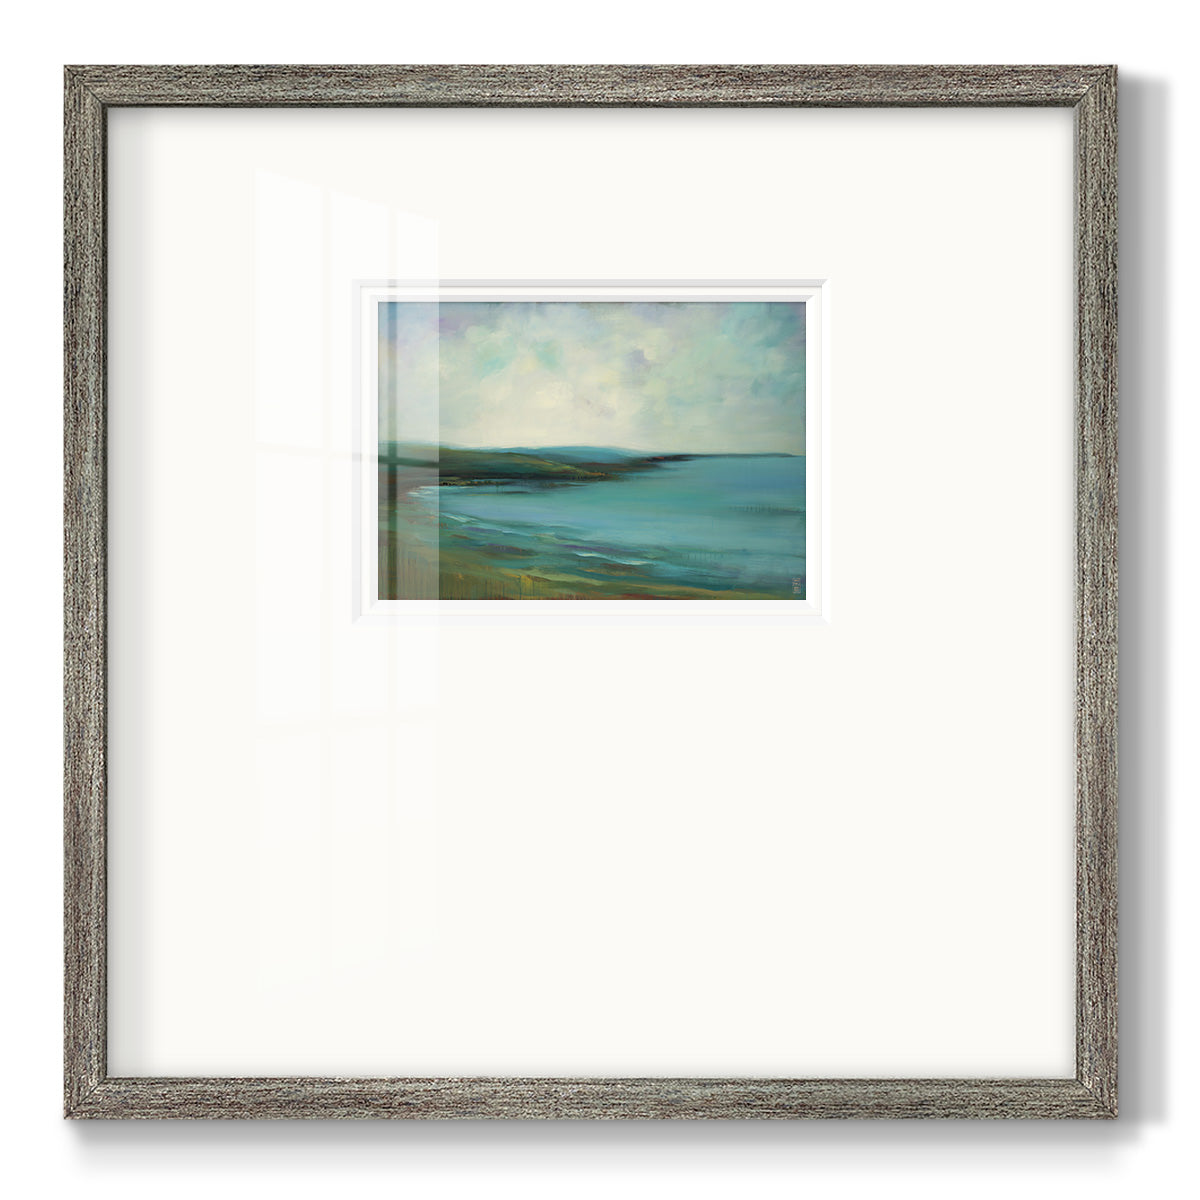 The Sound Premium Framed Print Double Matboard